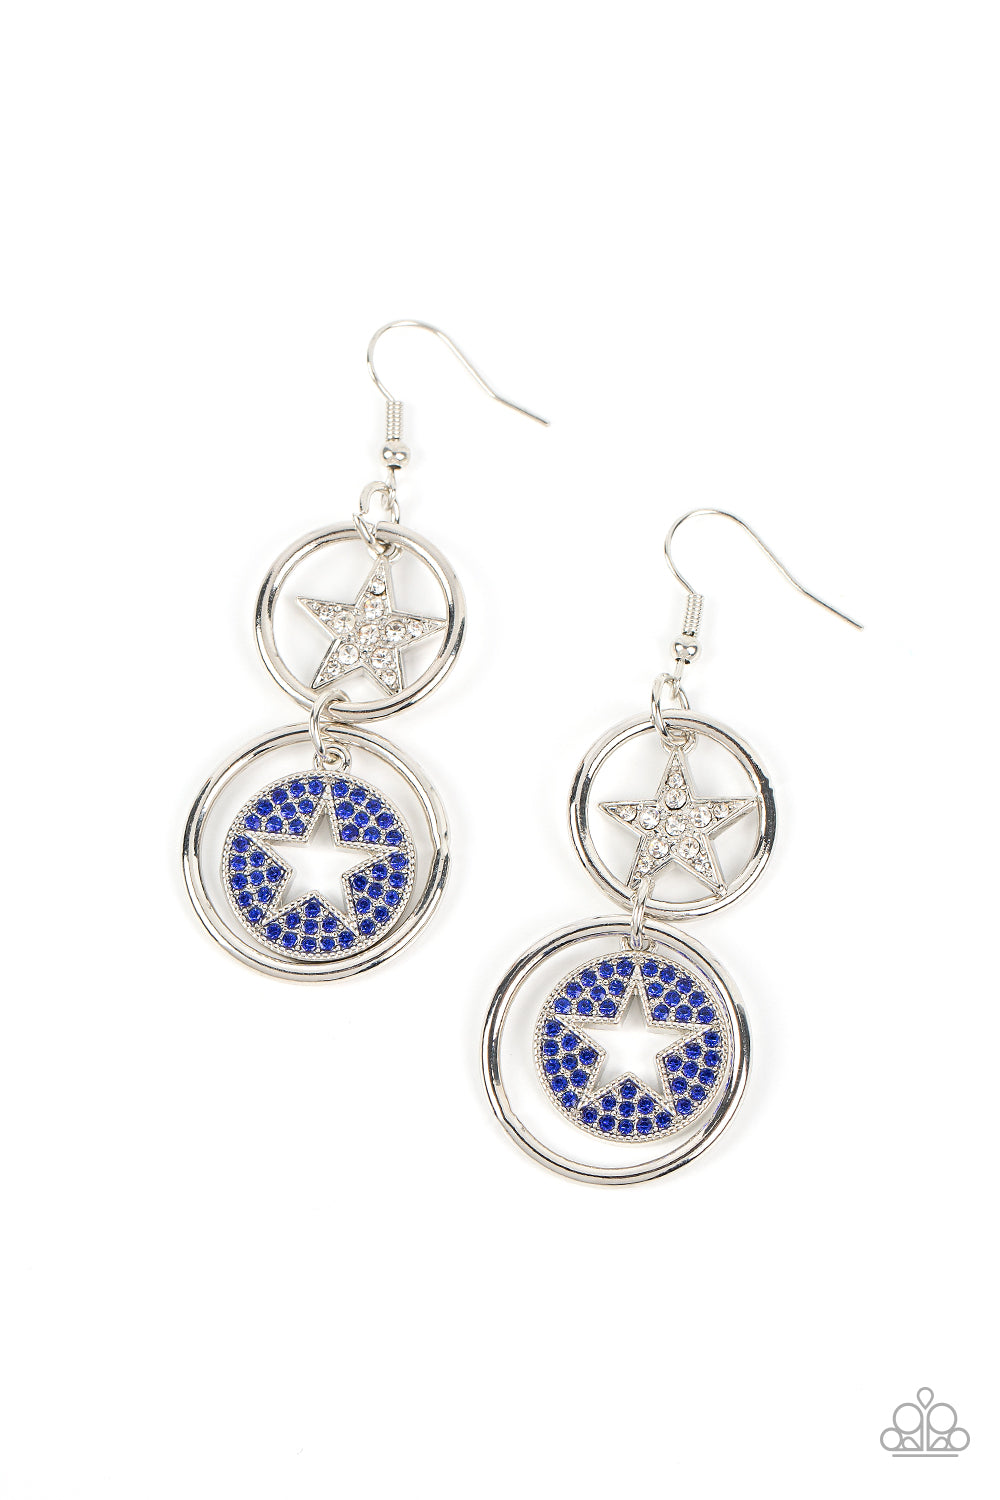 Paparazzi Accessories - Liberty and SPARKLE for All #E640 Bin - Blue Earrings